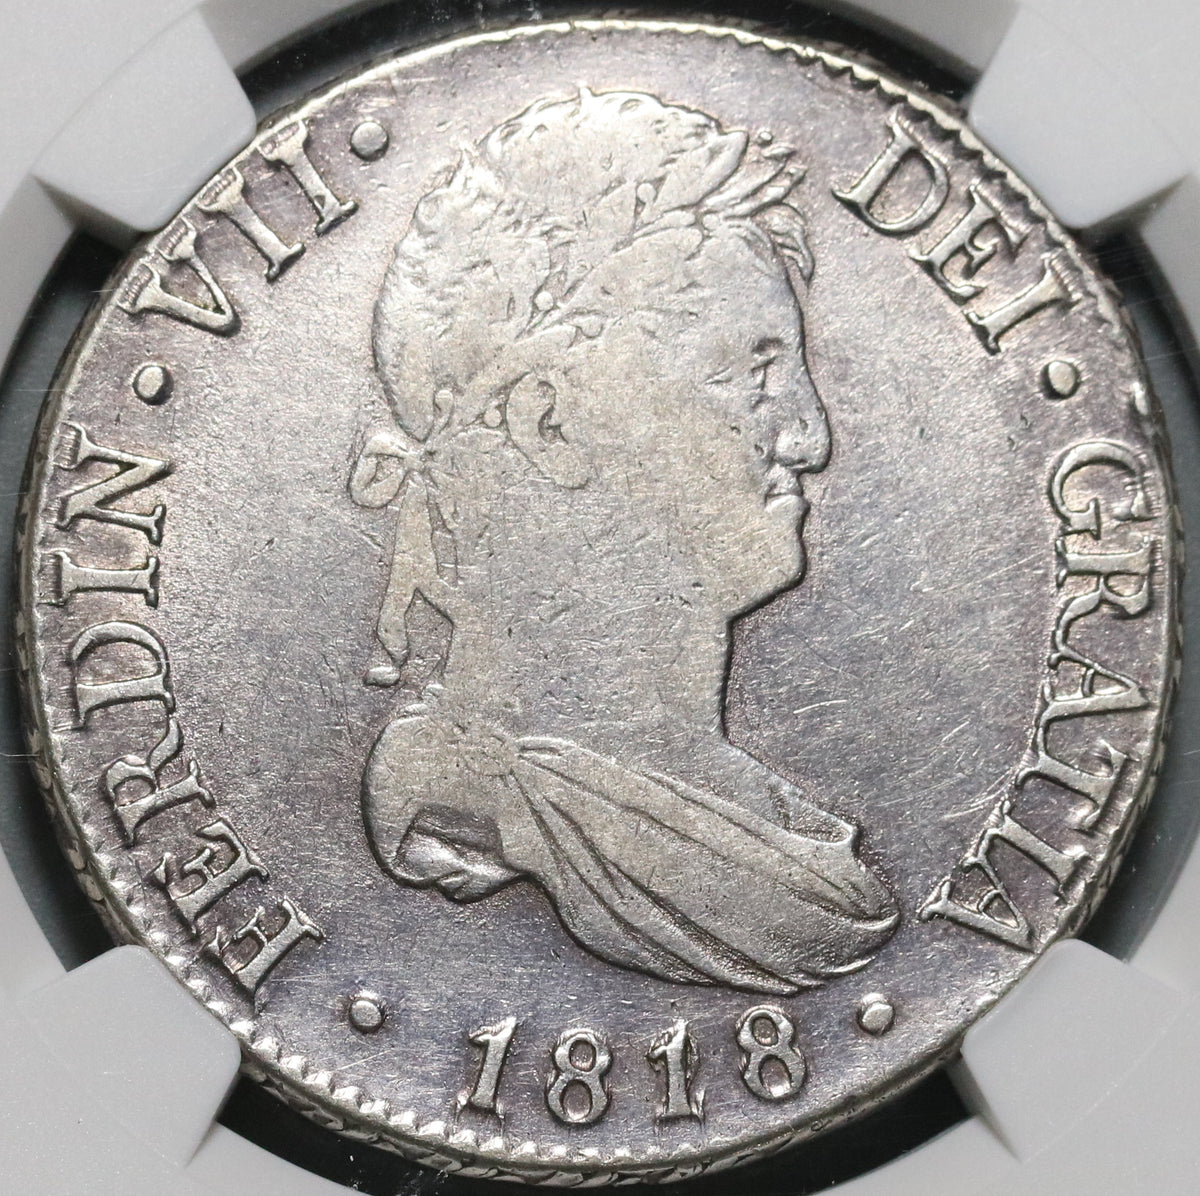 1818/28-M NGC VF 25 Spain 8 Reales Rare Date Error Silver Coin POP 